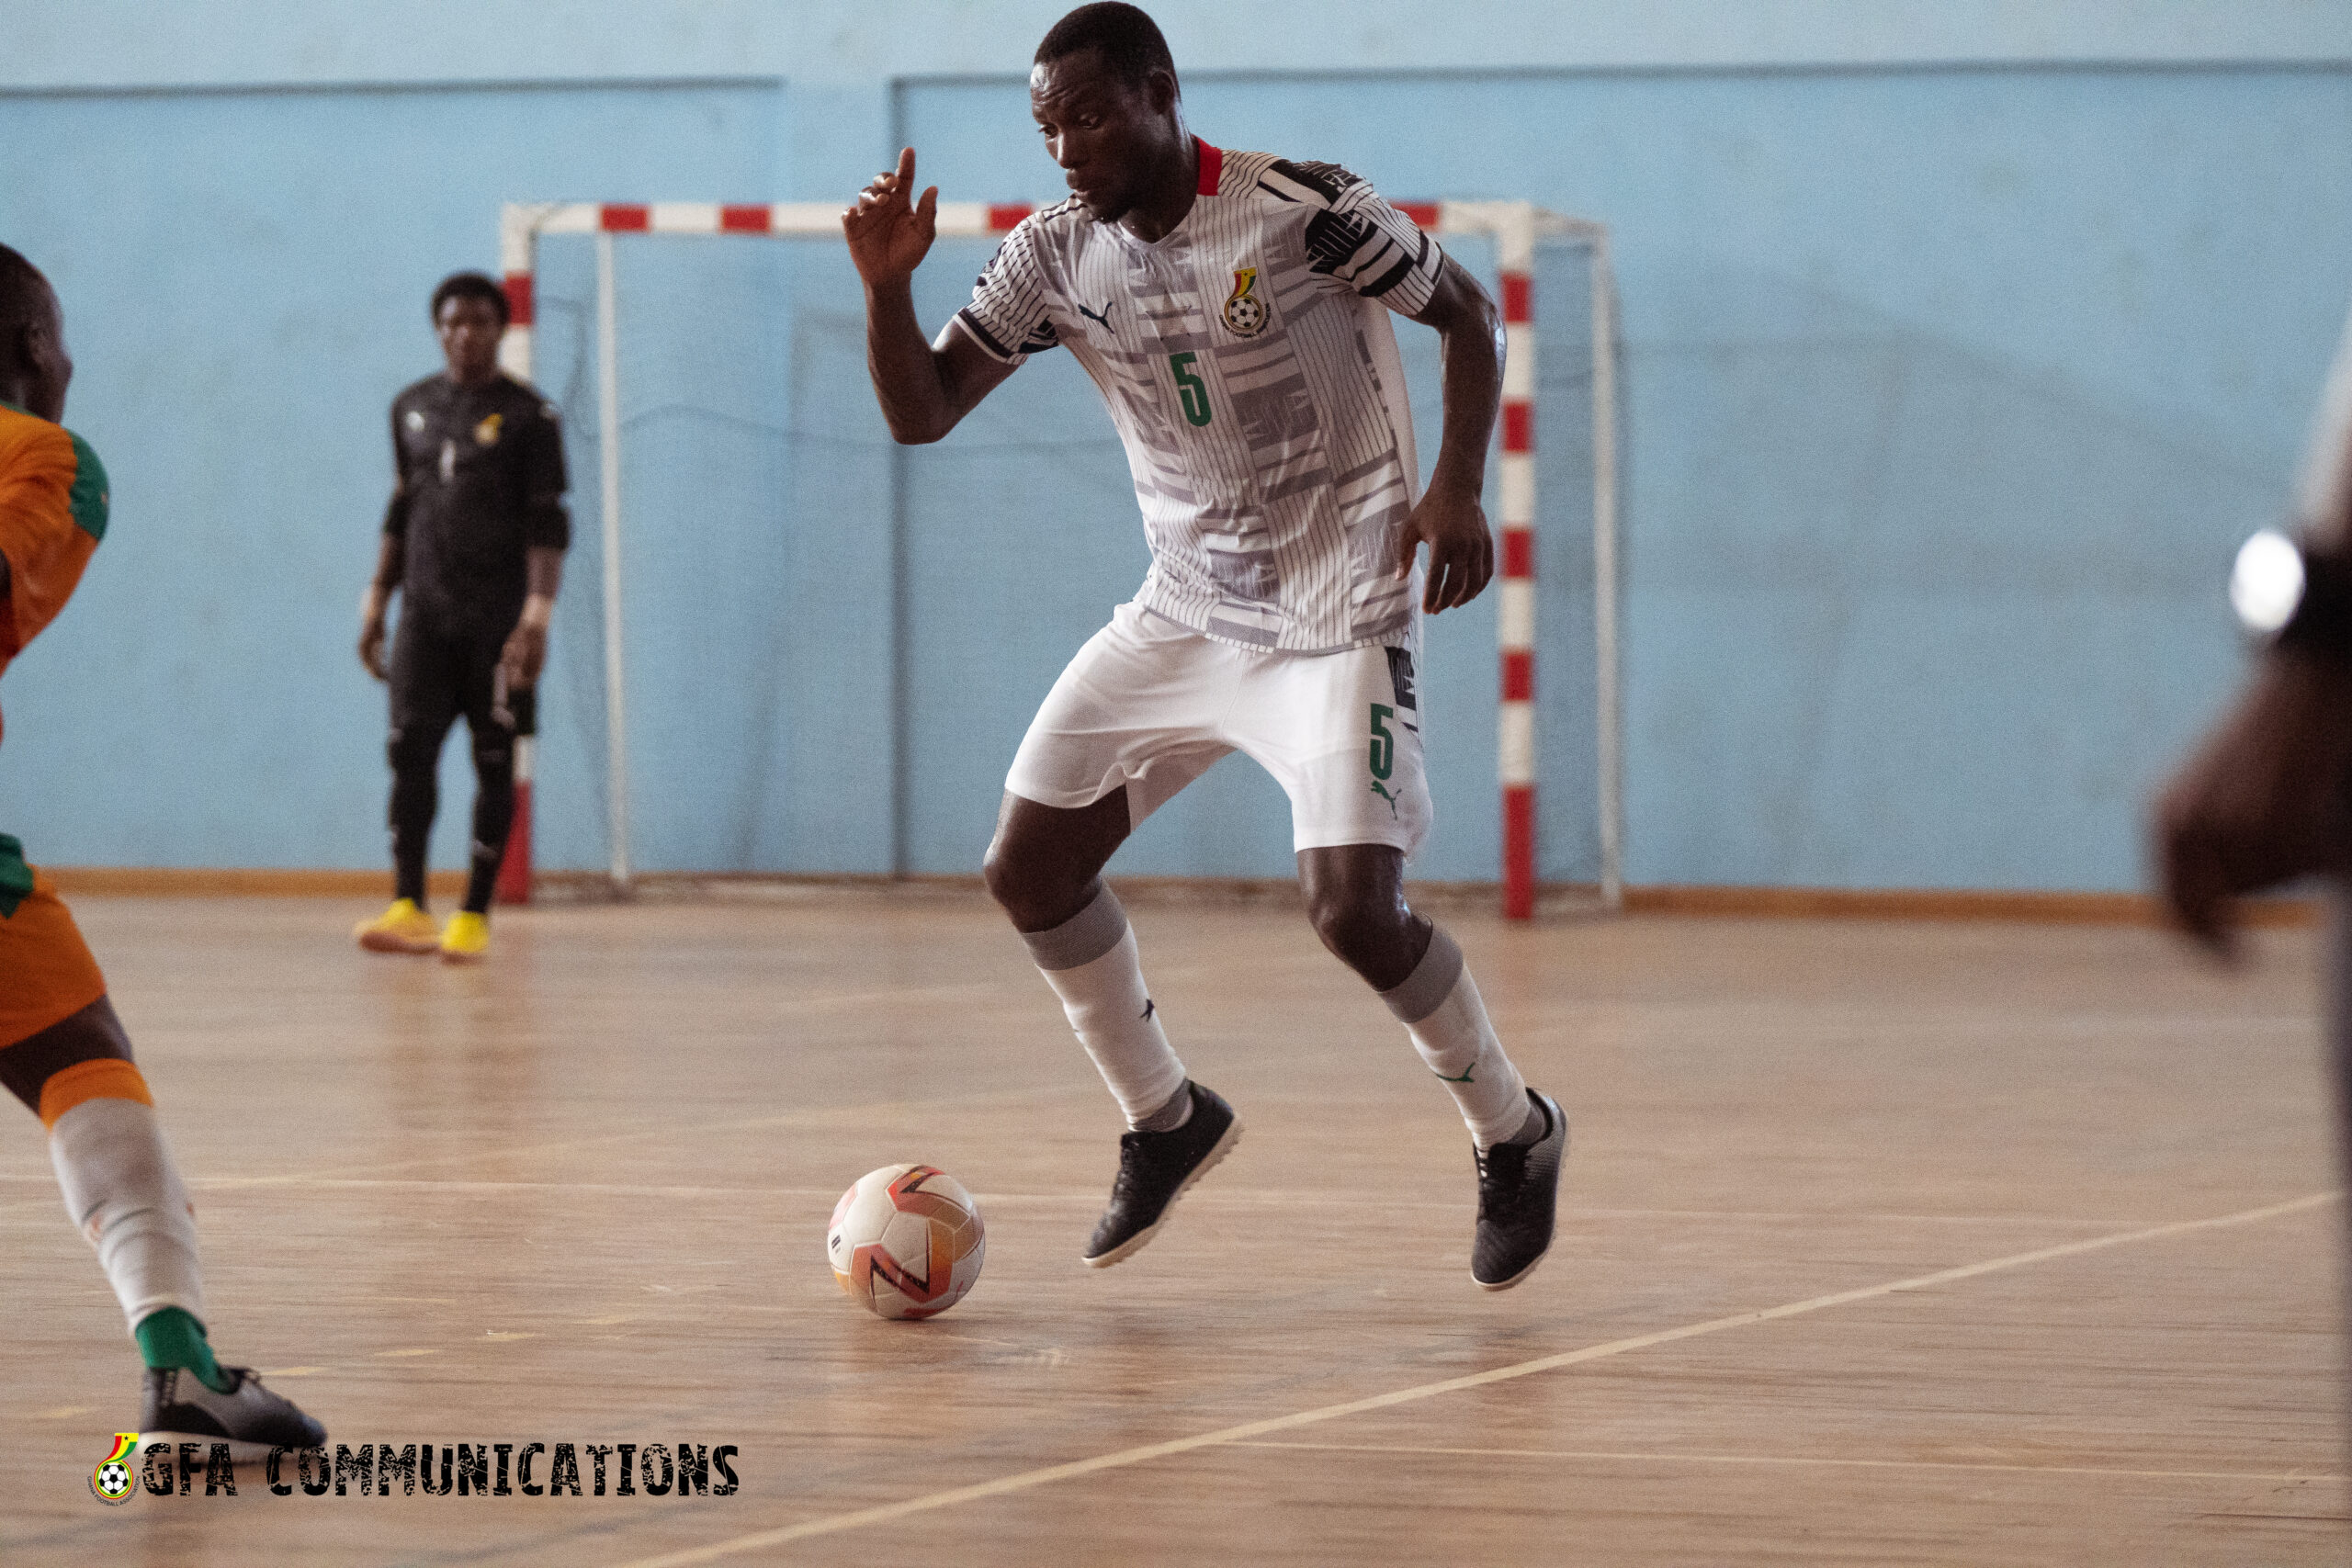 Ghana shock Cote D’Ivoire 6-2 to qualify for Futsal Africa Cup of Nations